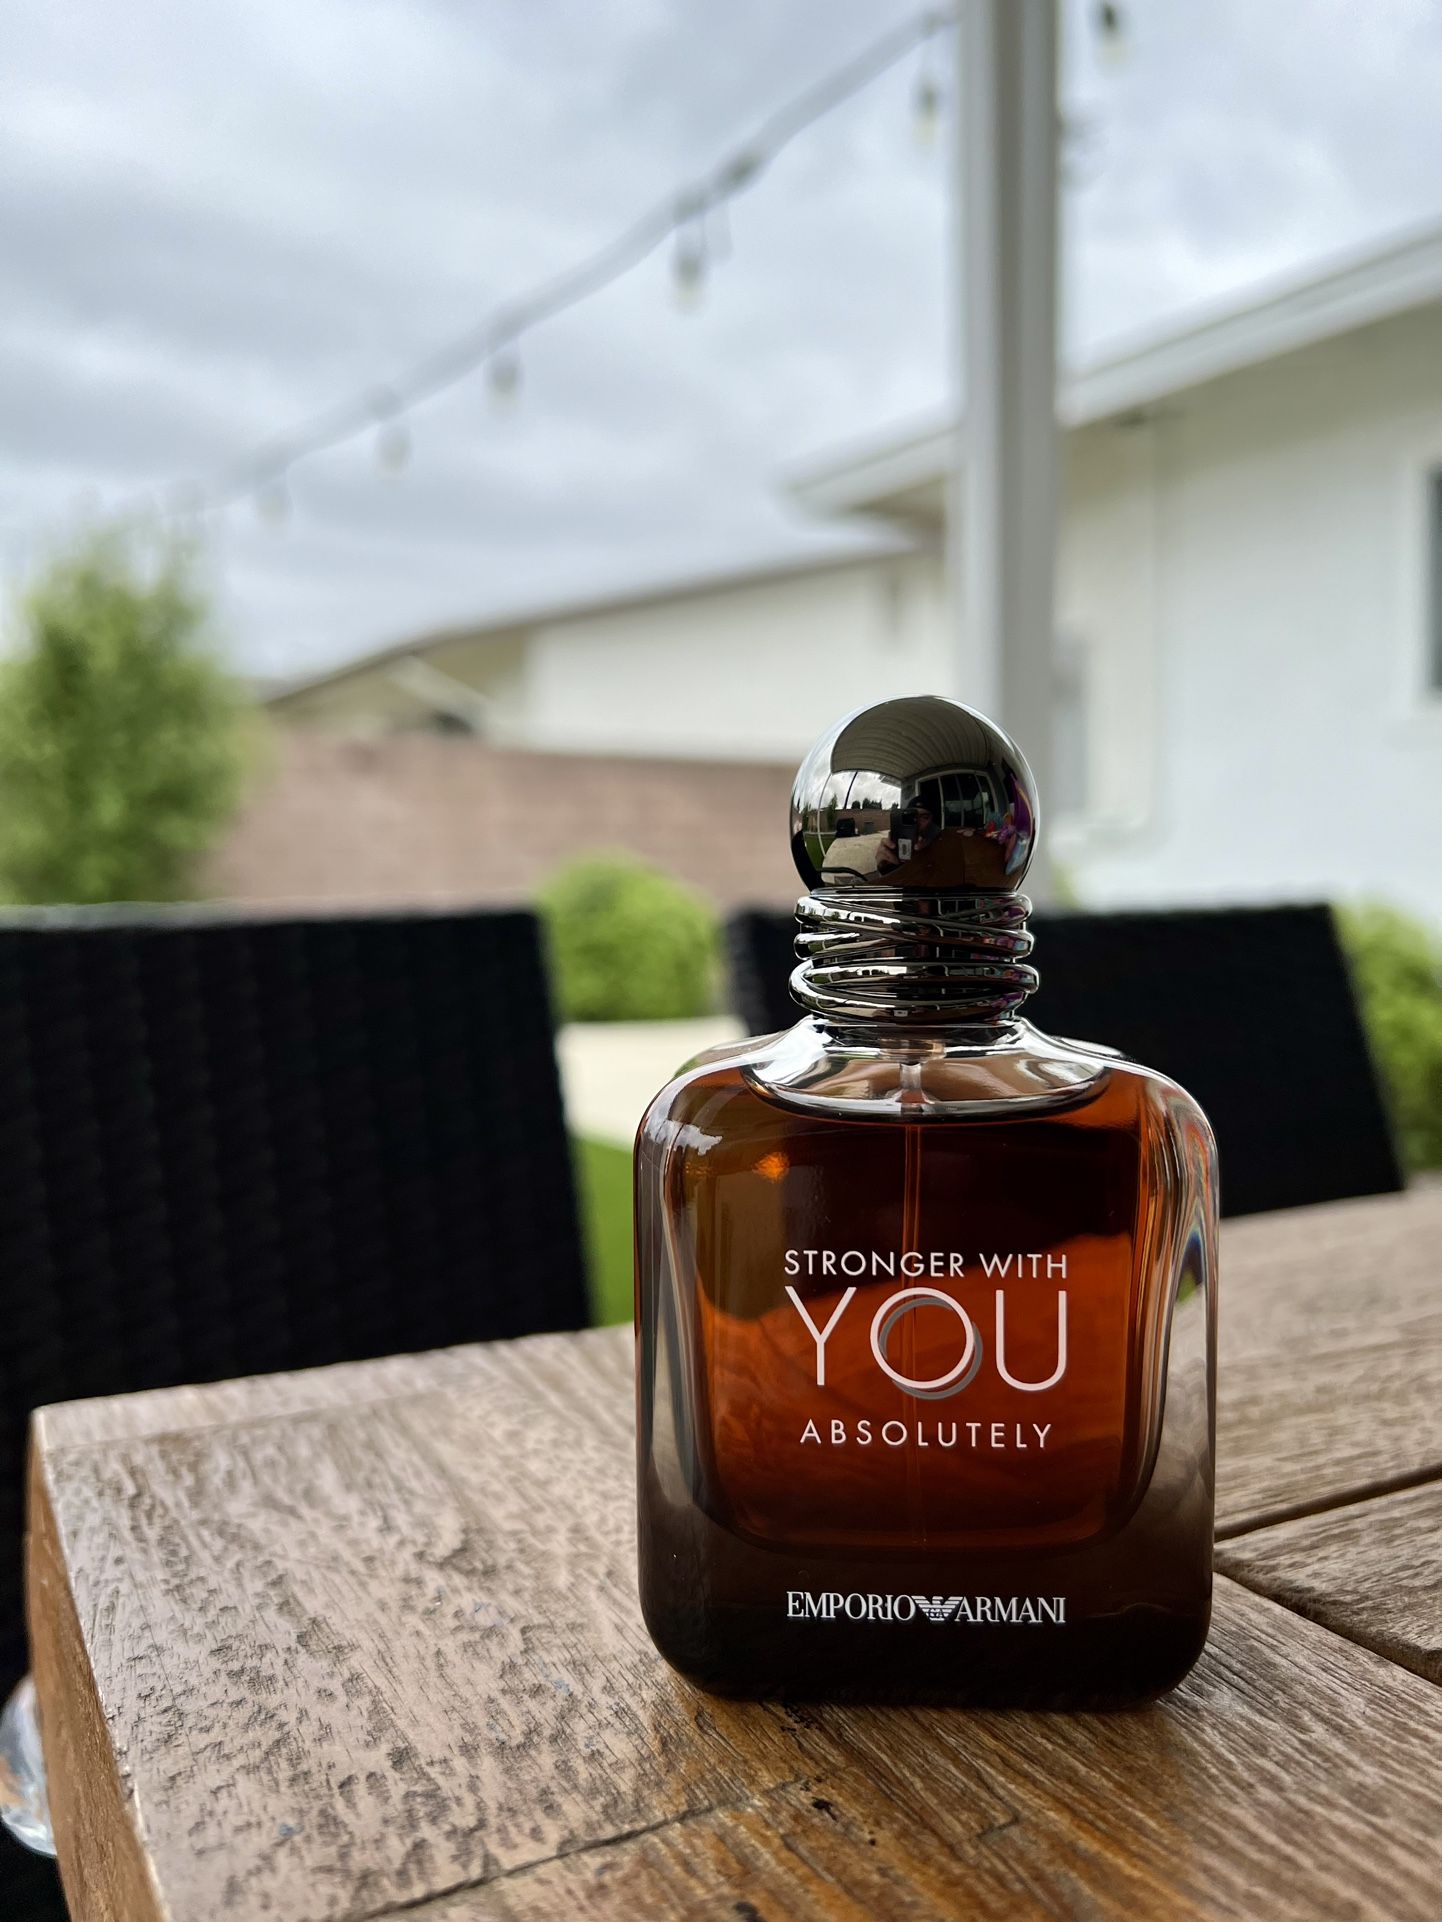 Stronger With You Absolutely by Emporio Armani